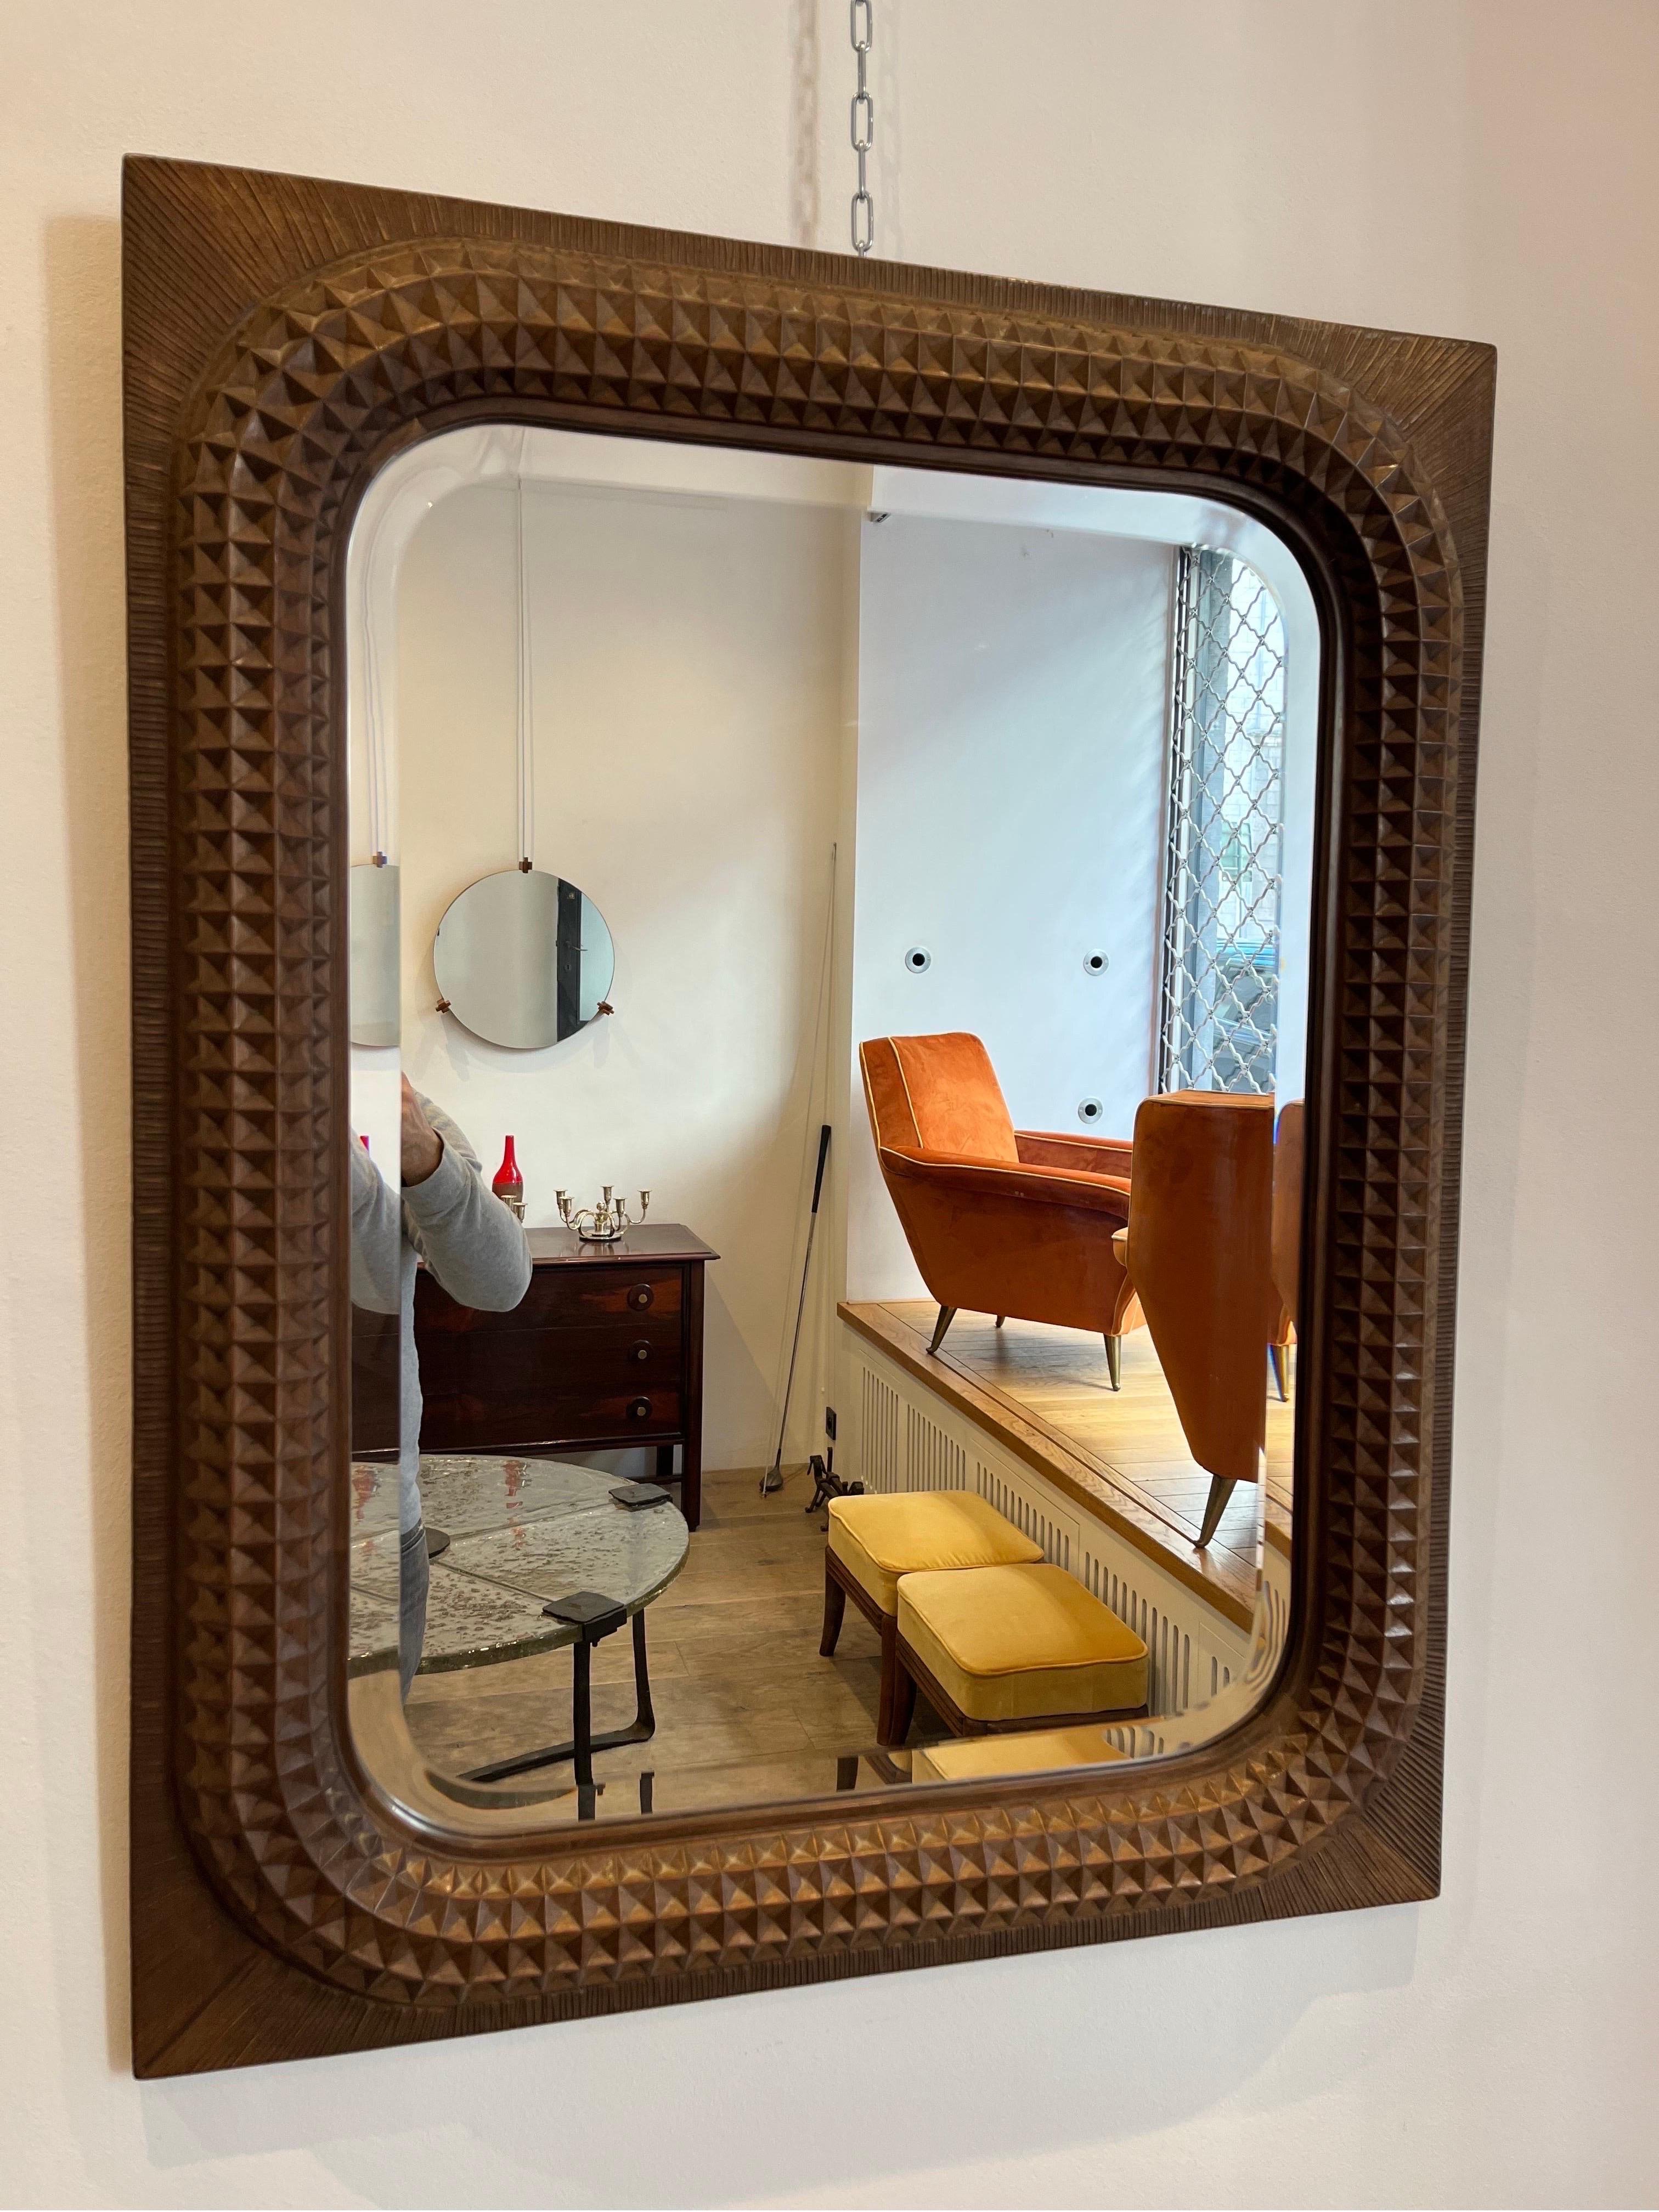 Giuseppe Rivadossi is a designer and cabinet maker still active in Brescia. His company, Officina Rivadossi, still creates design by his hand. All his designs are his own creations. The present mirror was created in the late 1970s early 80s. It is